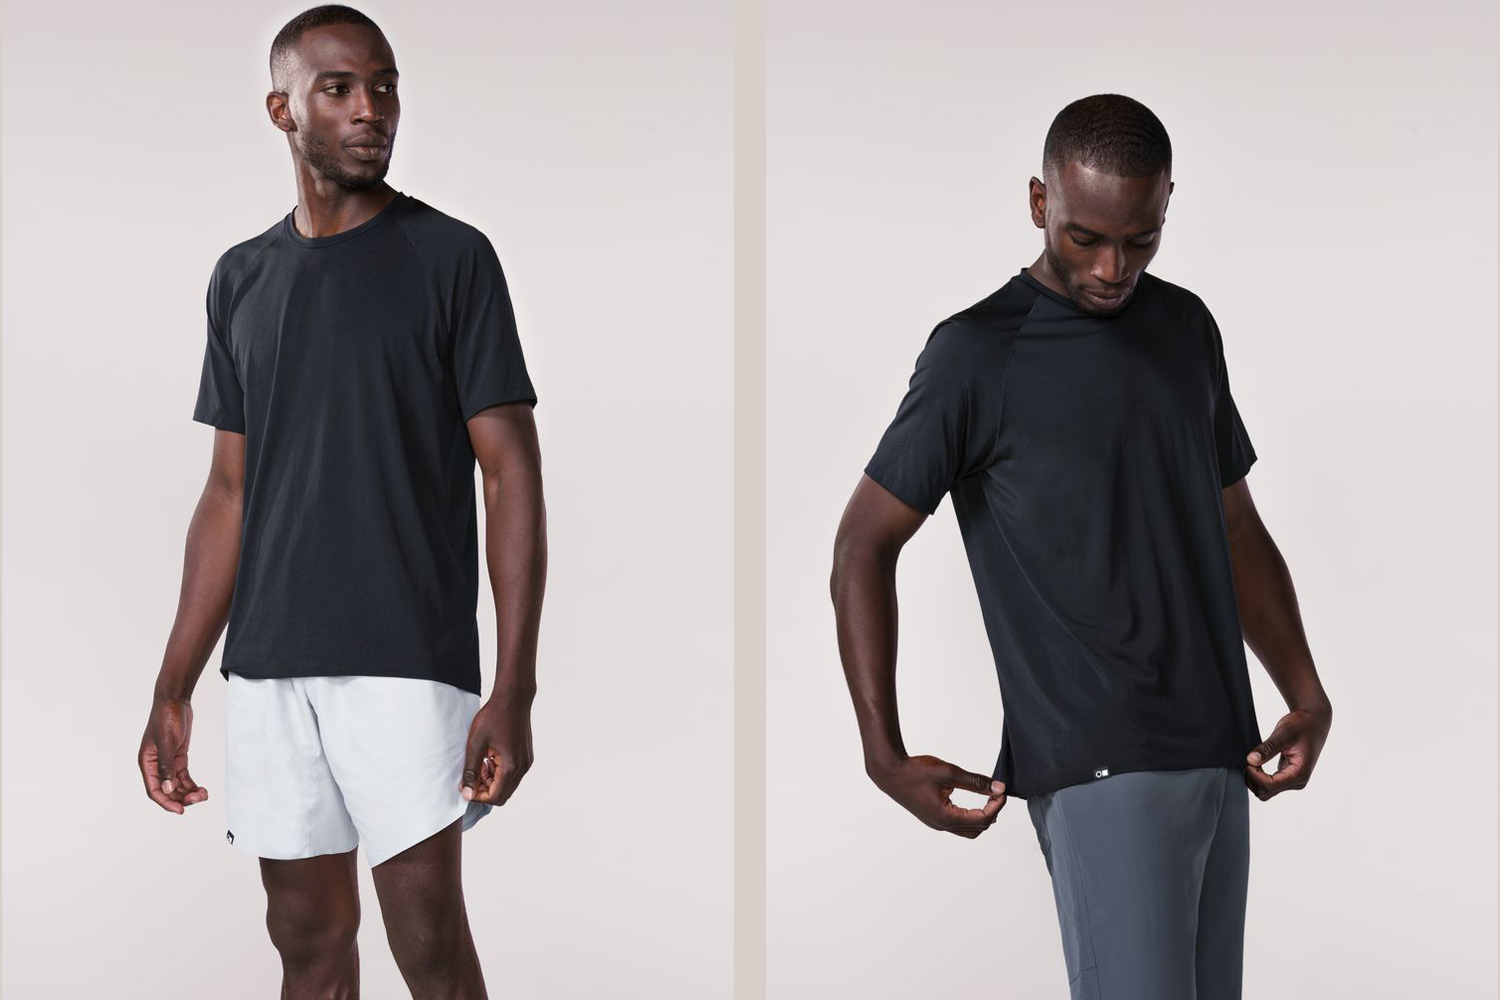 The LifeLabs CoolLife Tee is a stylish, versatile workout tee that keeps you cool in the middle of a workout